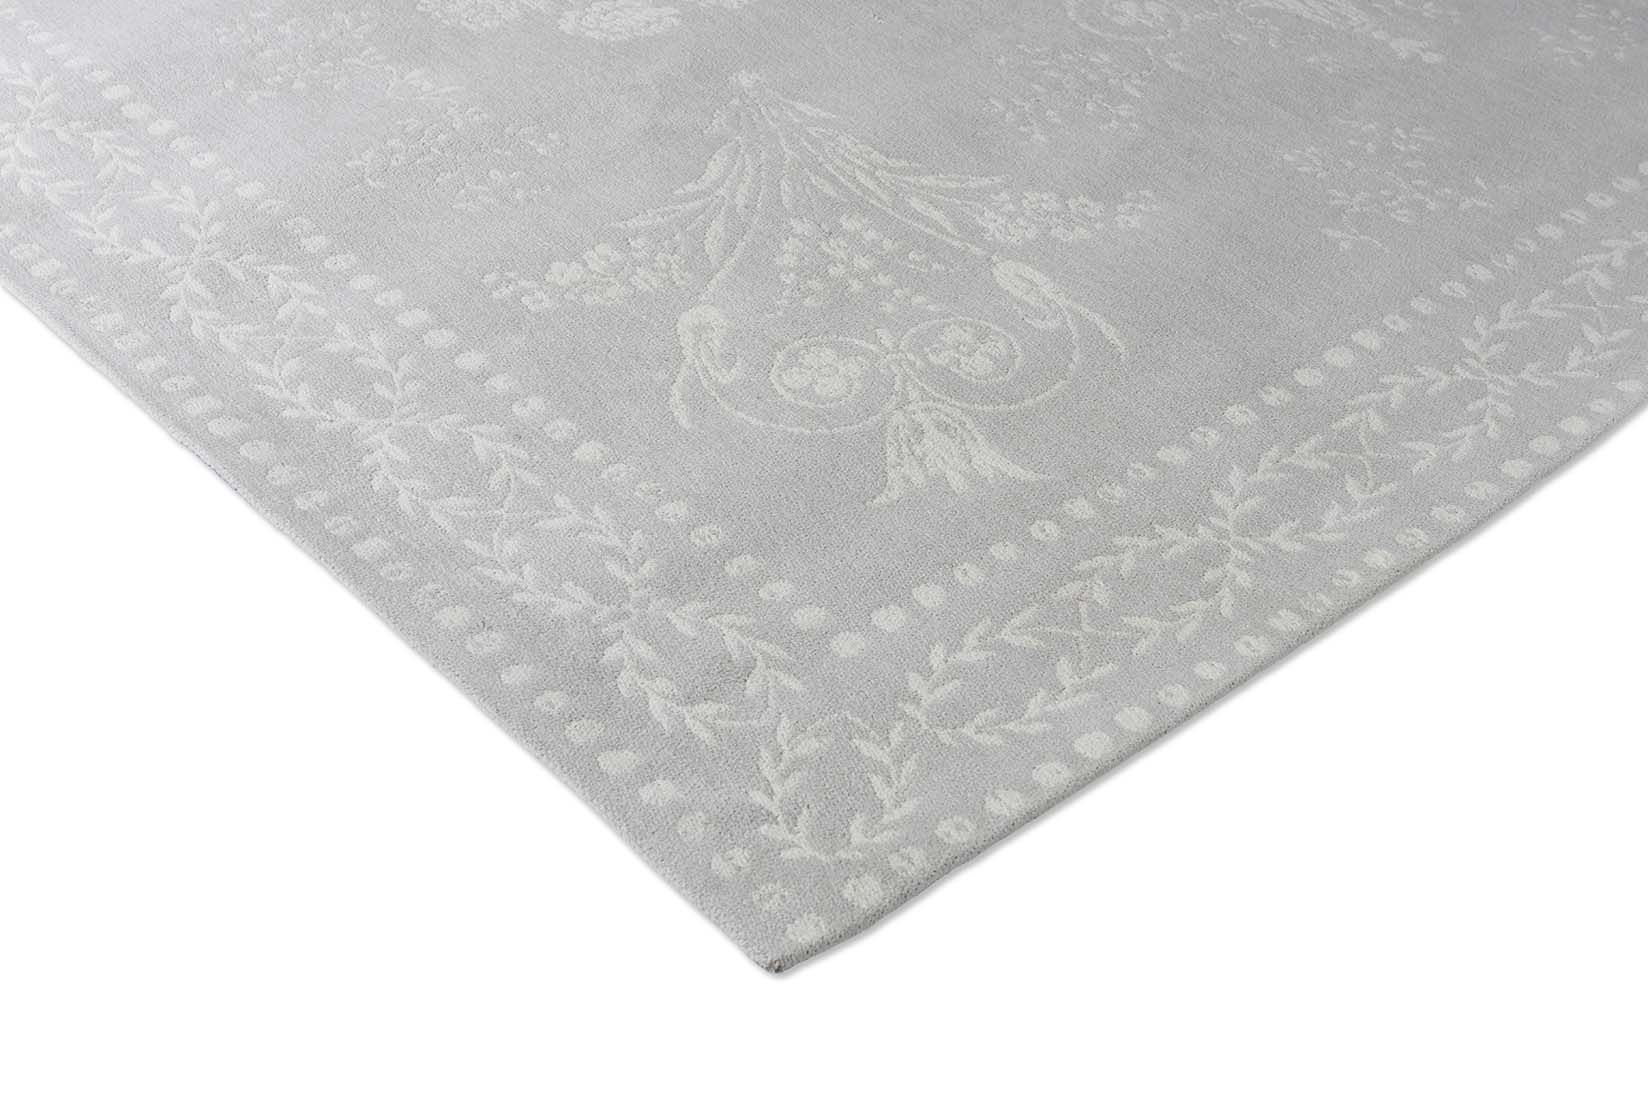 Grey cotton rug in a damask pattern
